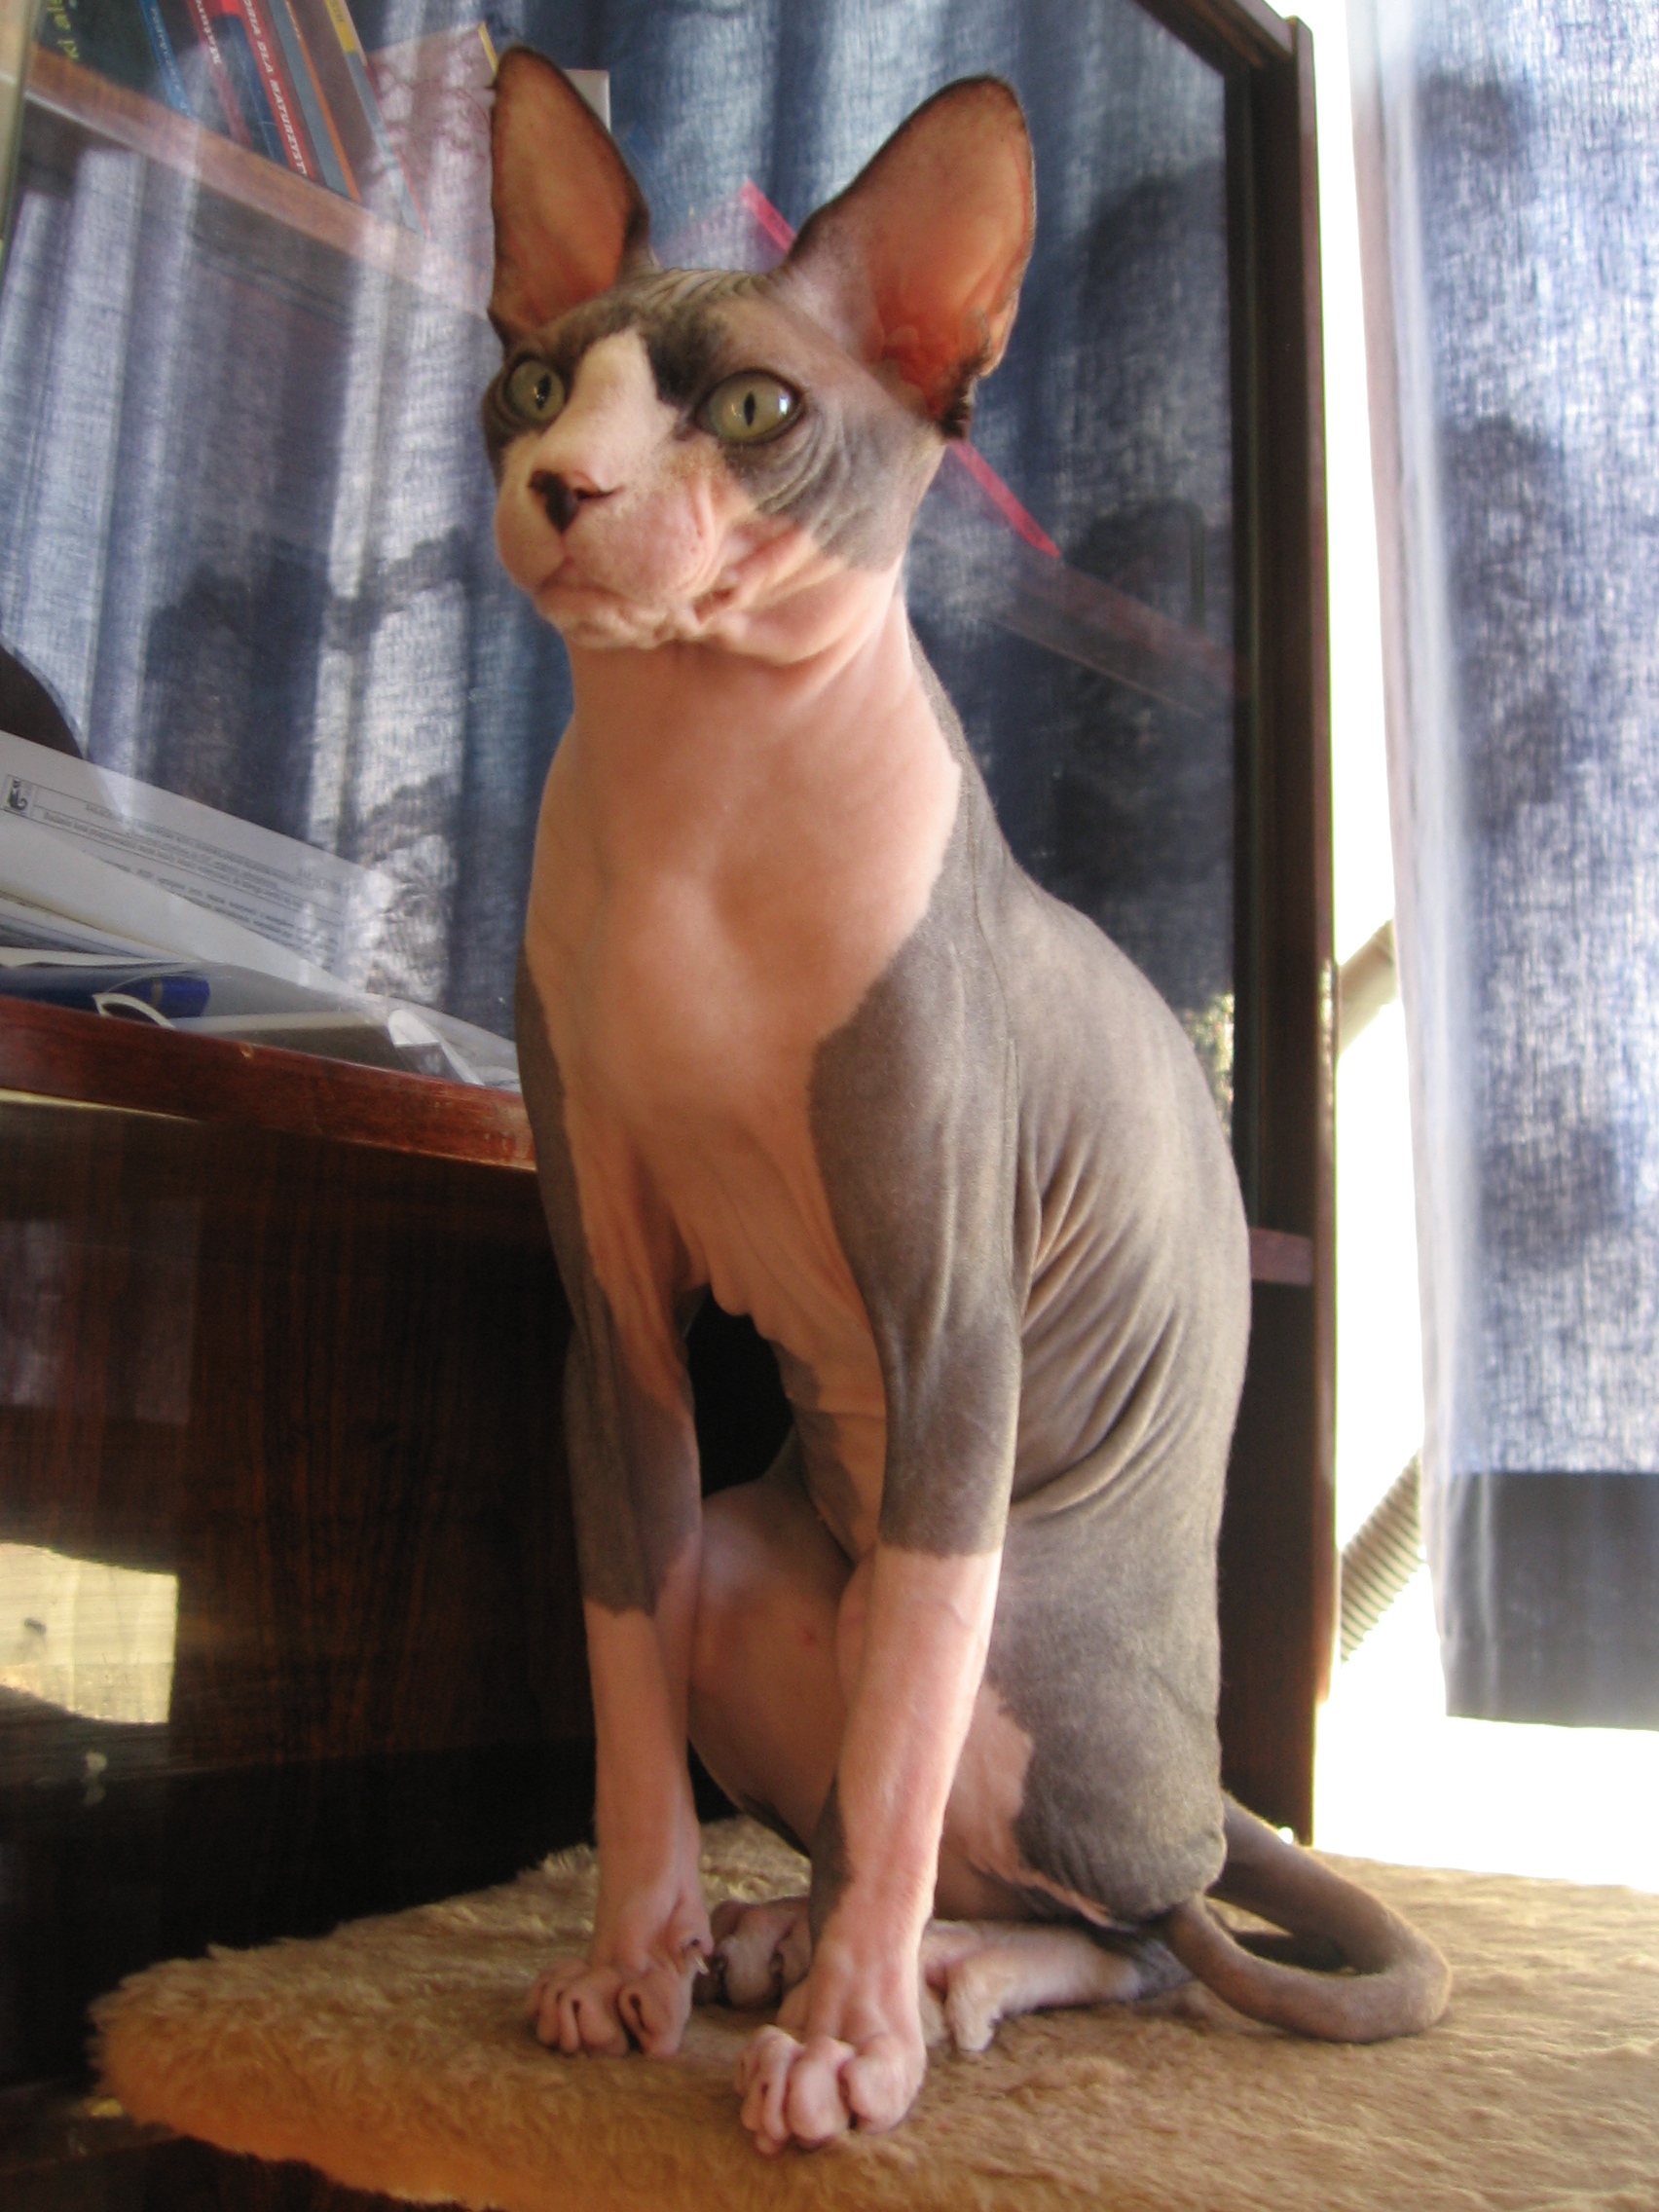 What is the purpose of hairless cats?